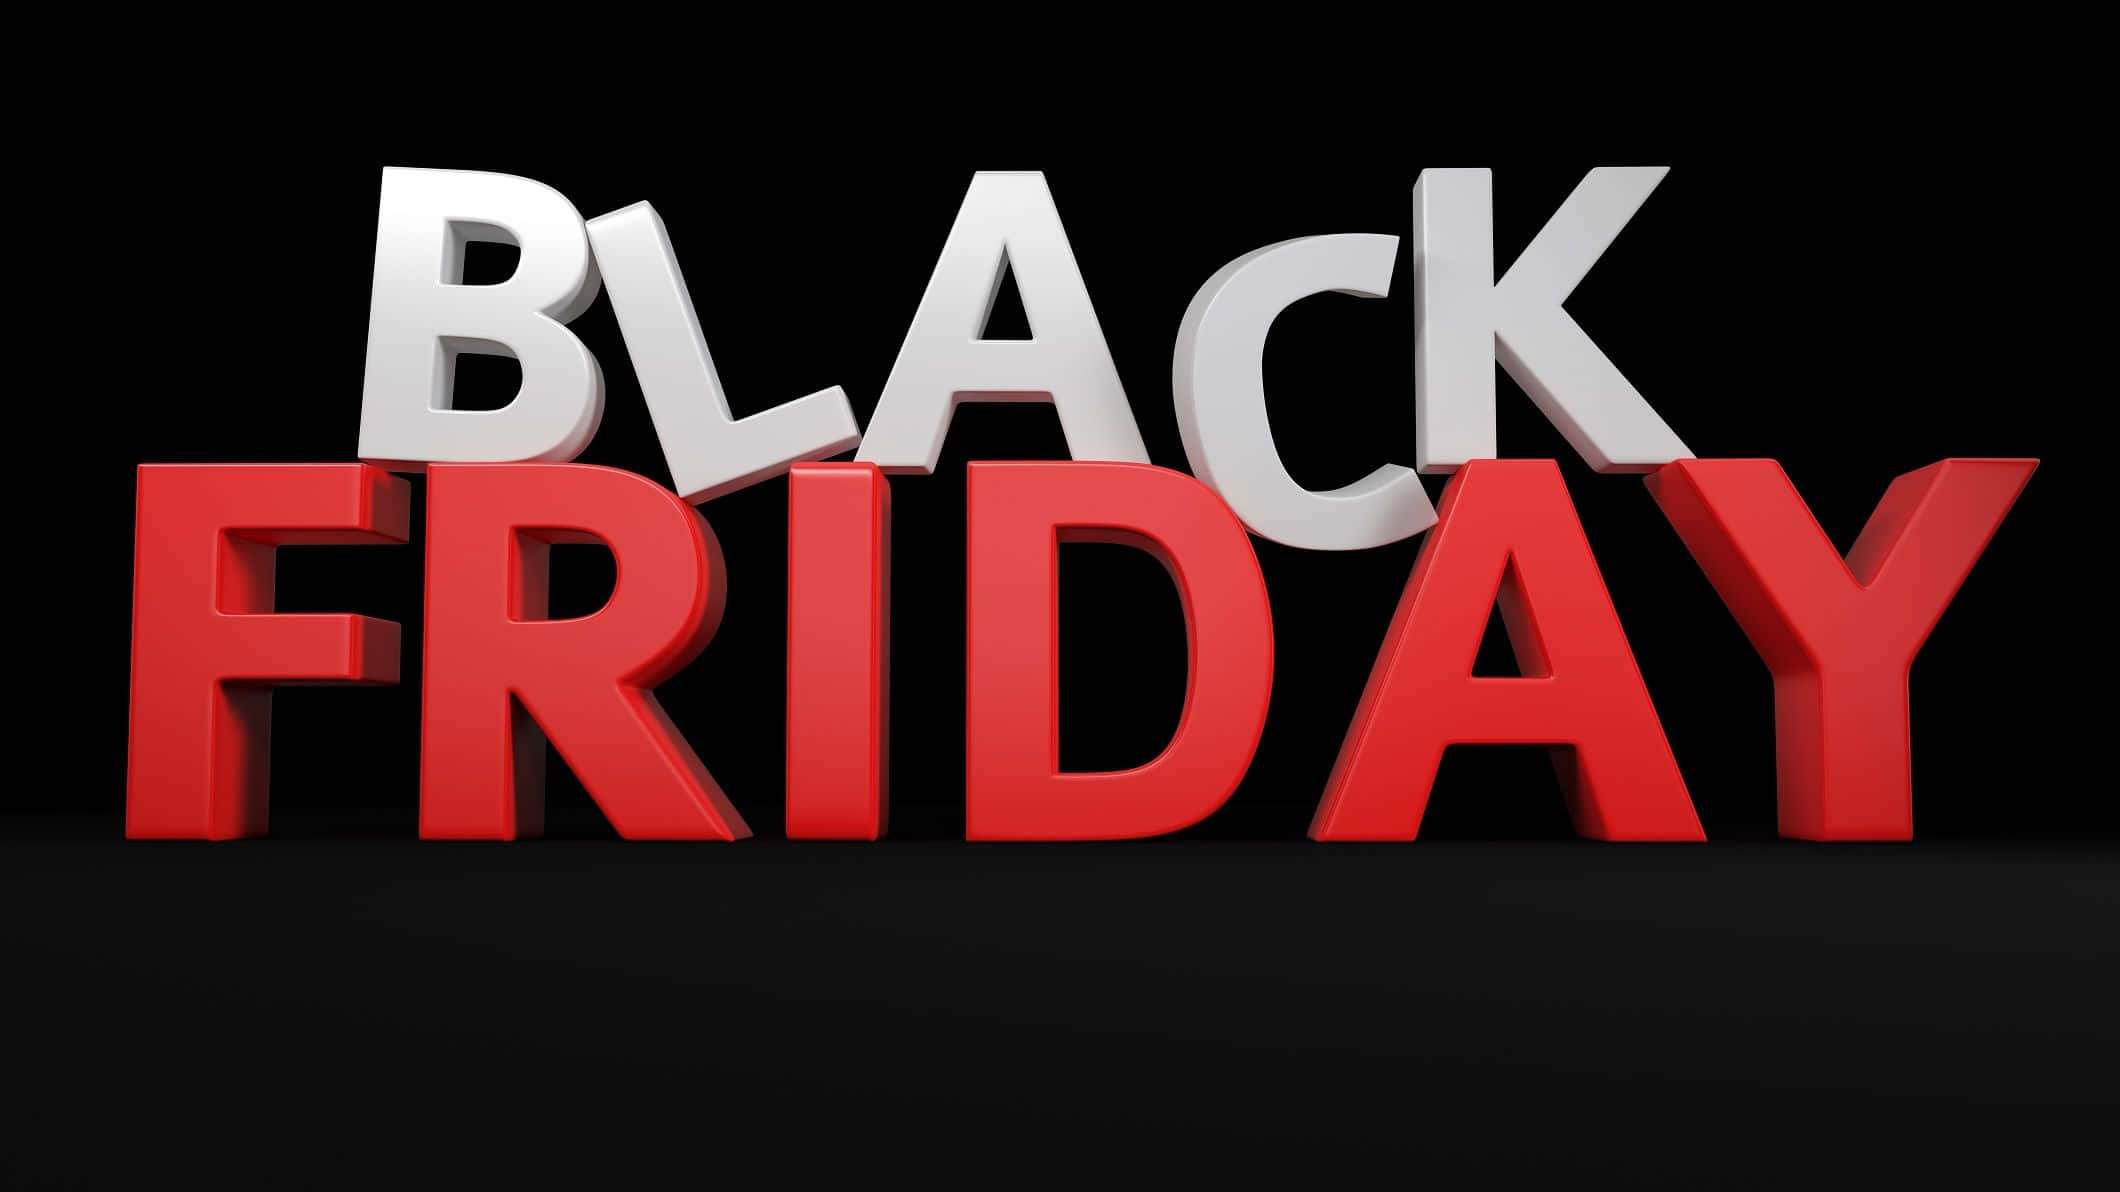 Black Friday Sale - A Black Friday Sale Is A Great Opportunity To Save Money